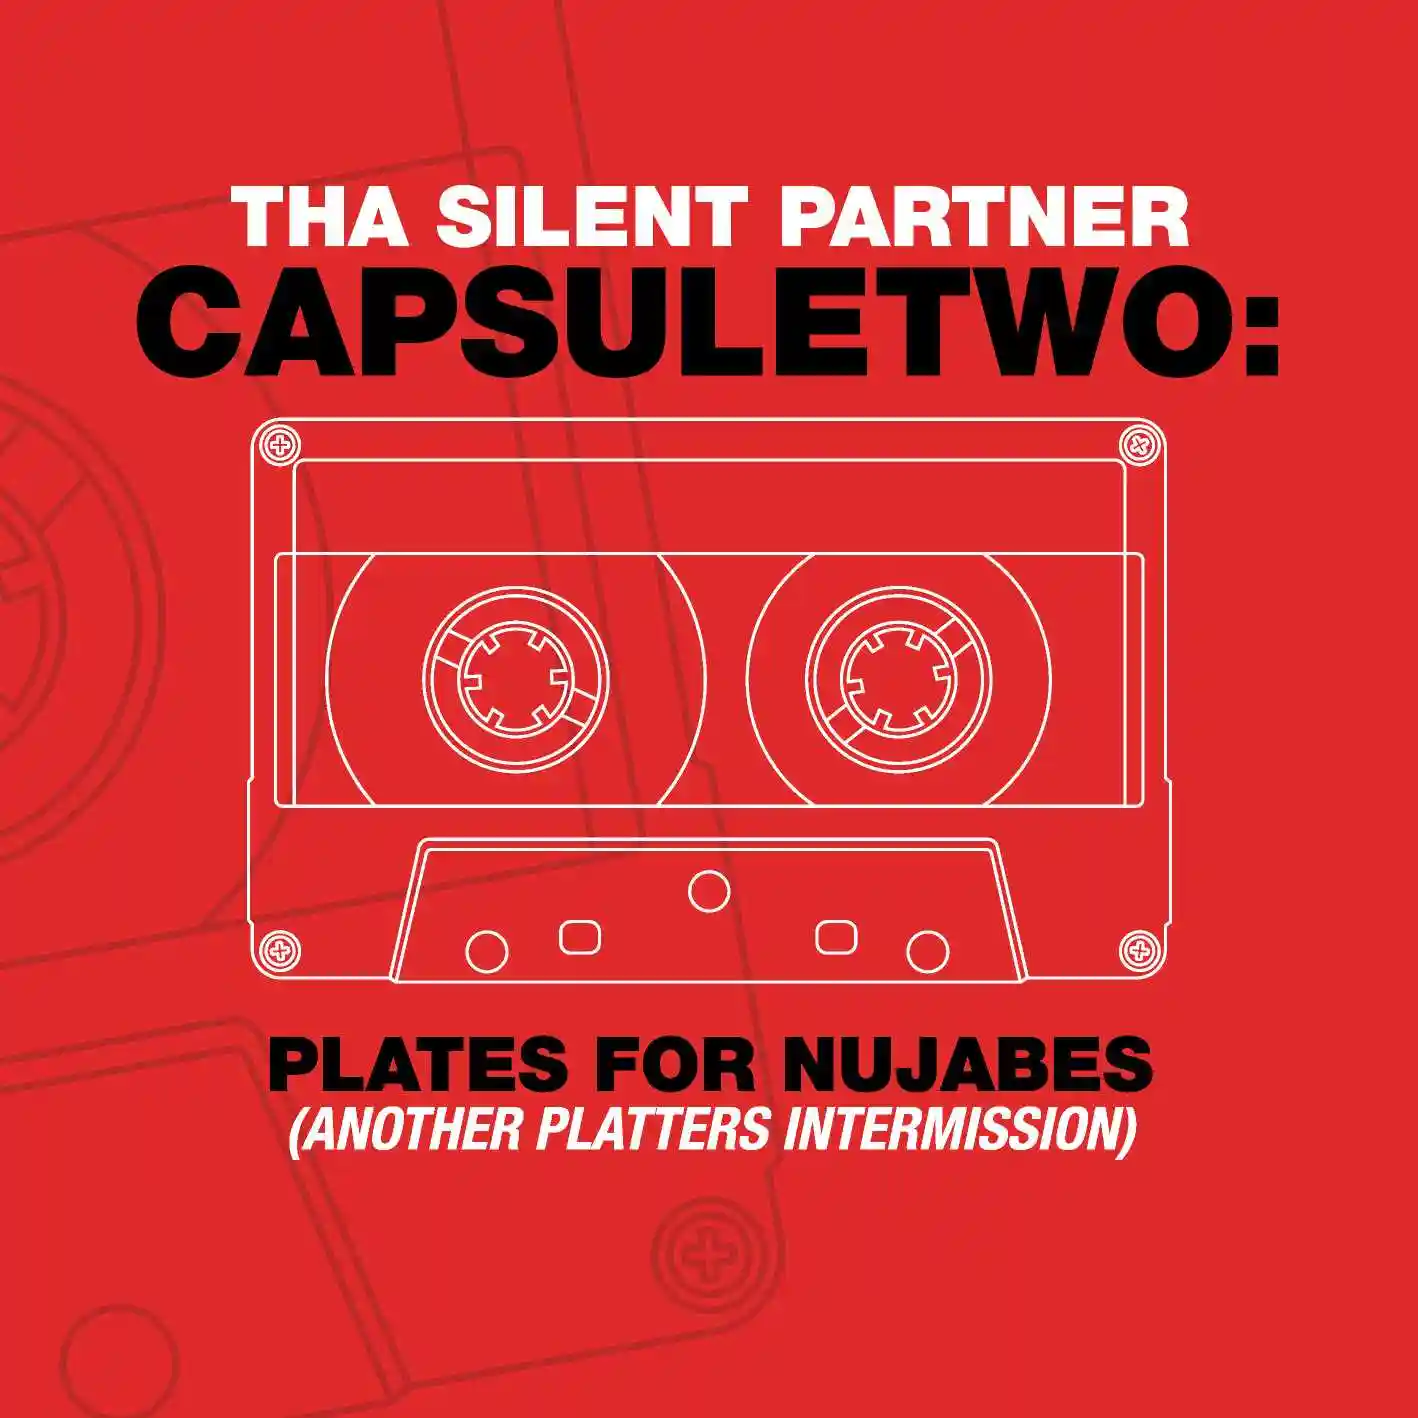 Album cover for “CAPSULETWO: Plates For Nujabes (Another Platters Intermission)” by Tha Silent Partner